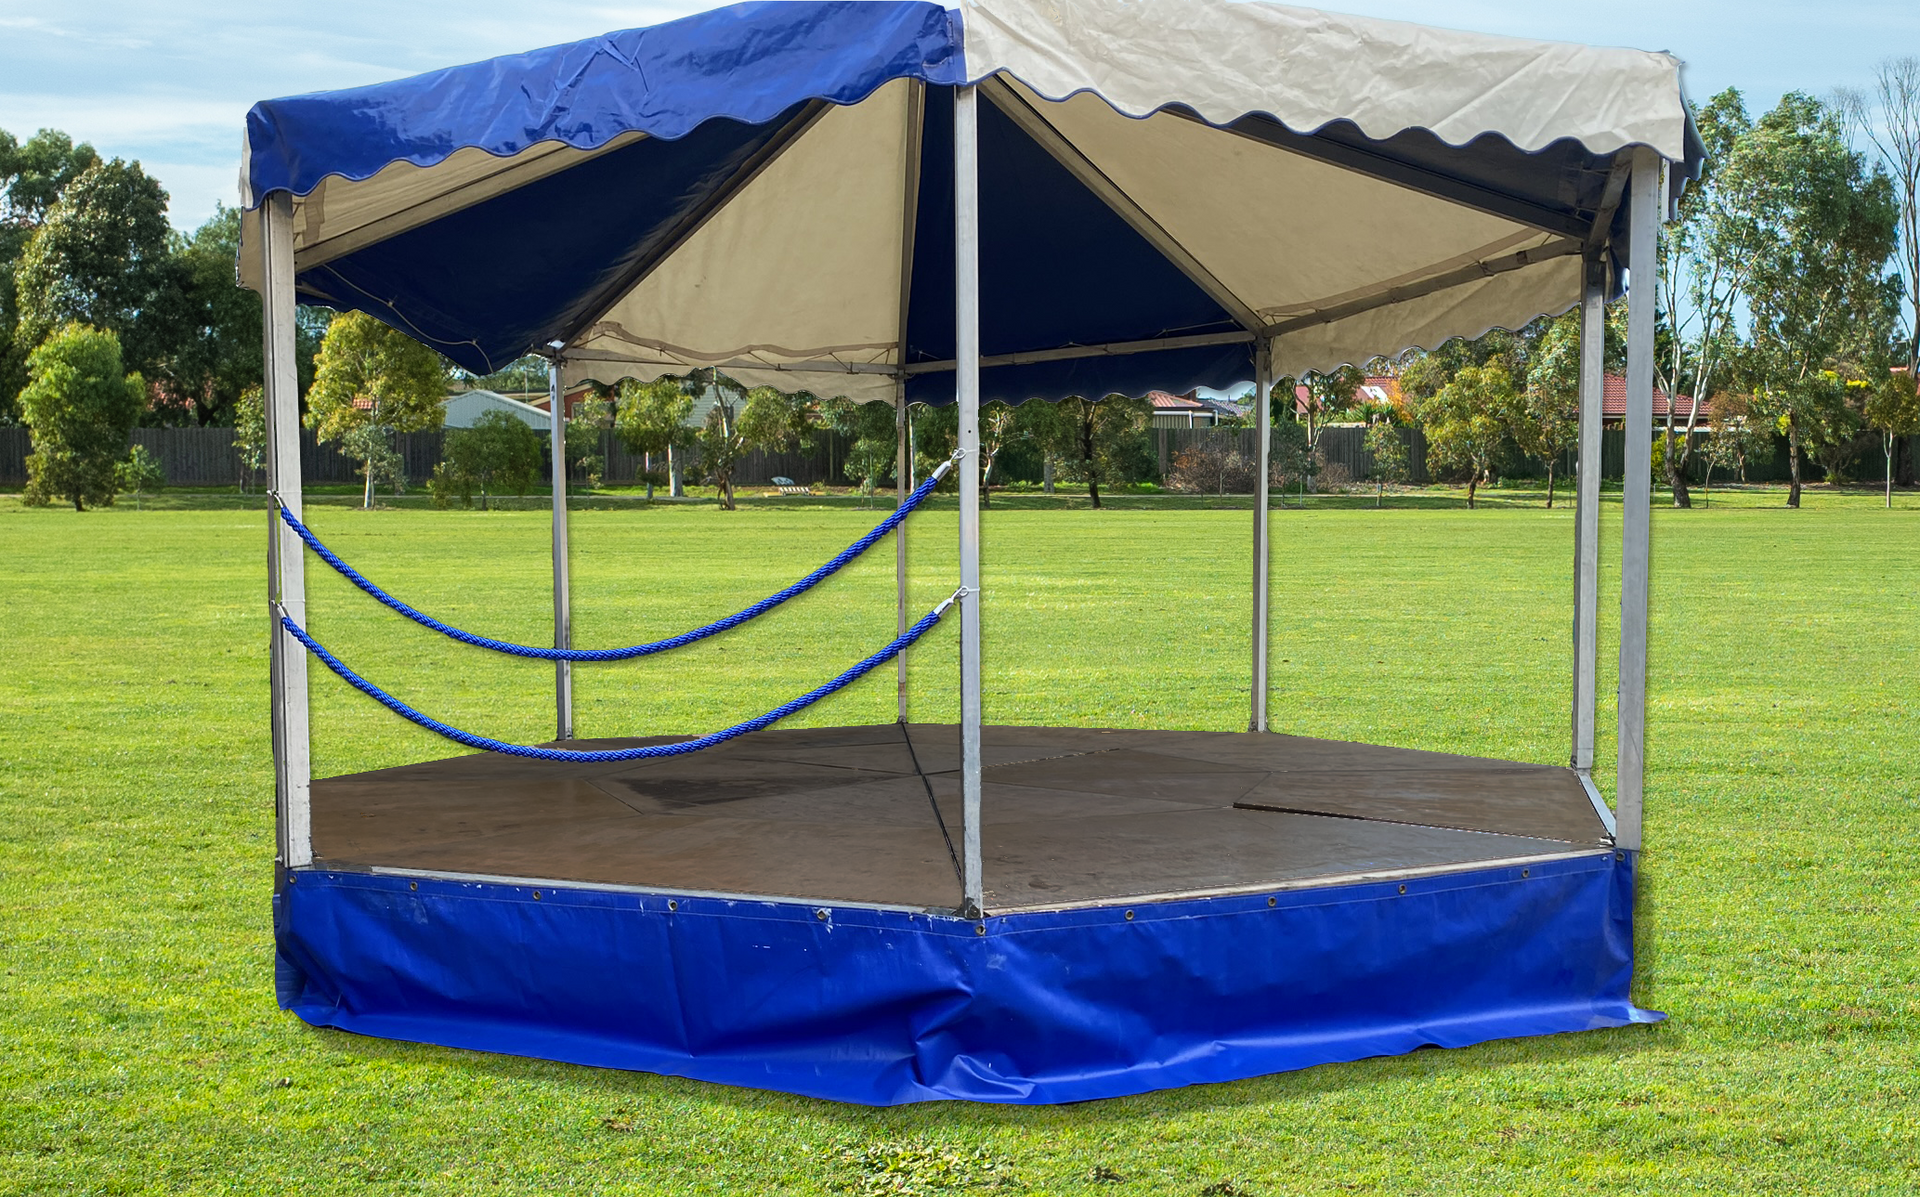 A mobile bandstand with white and blue canopy at an event